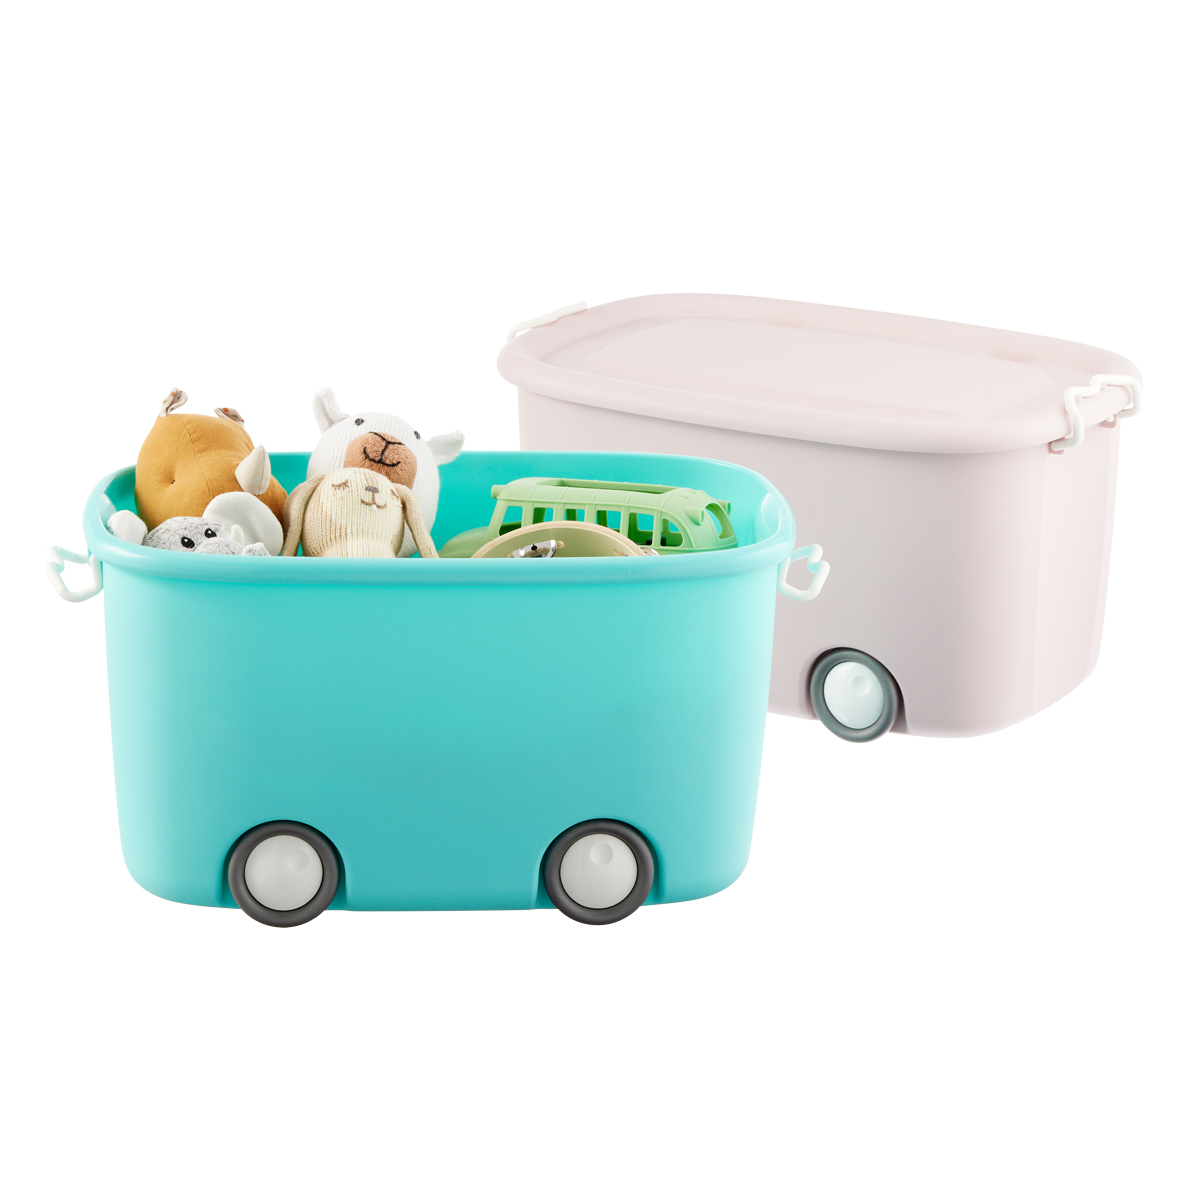 https://www.containerstore.com/catalogimages/495859/10077713G_Rolling_Storage_Bin_With_L.jpg